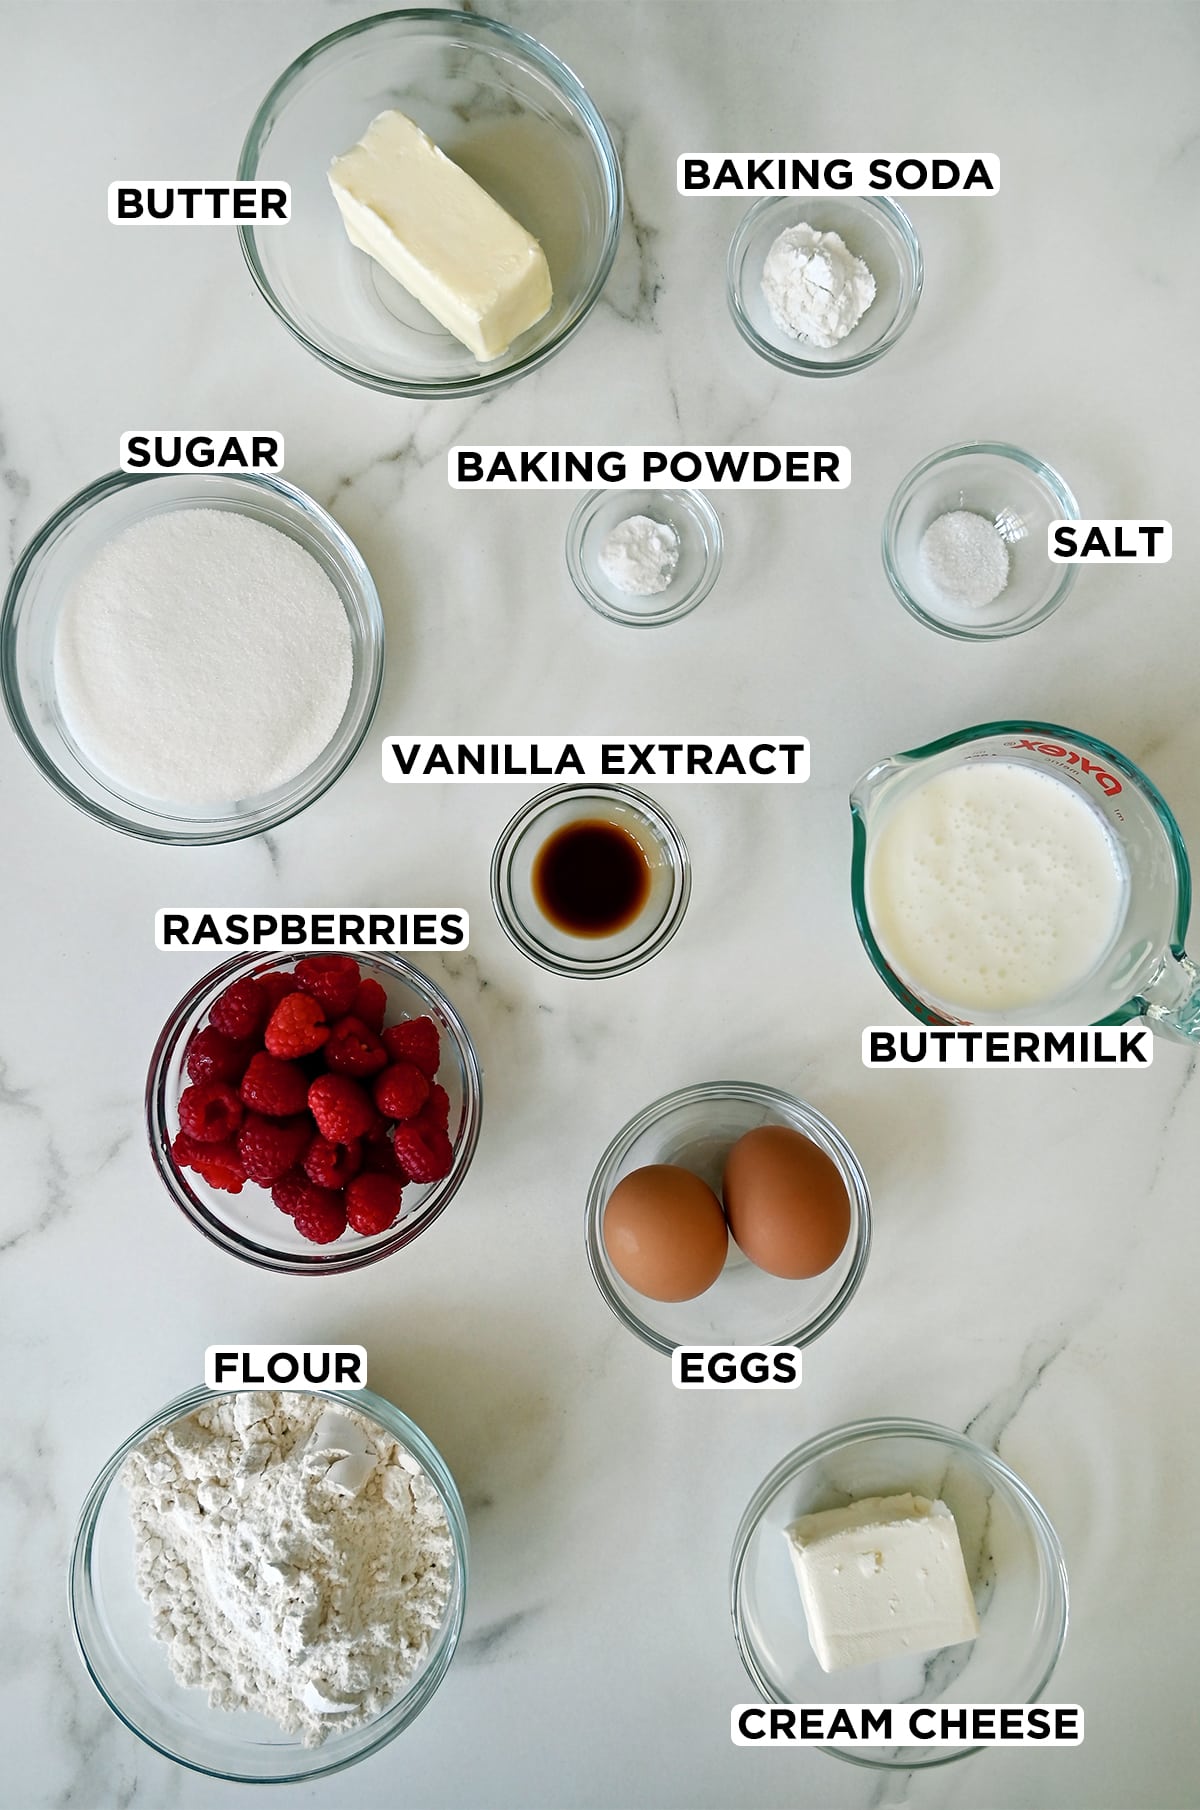 Various sizes of glass bowls containing ingredients needed to make a coffee cake, including a stick of butter, baking soda and baking powder, salt, sugar, vanilla extract, buttermilk, two eggs, flour, cream cheese, and fresh raspberries.